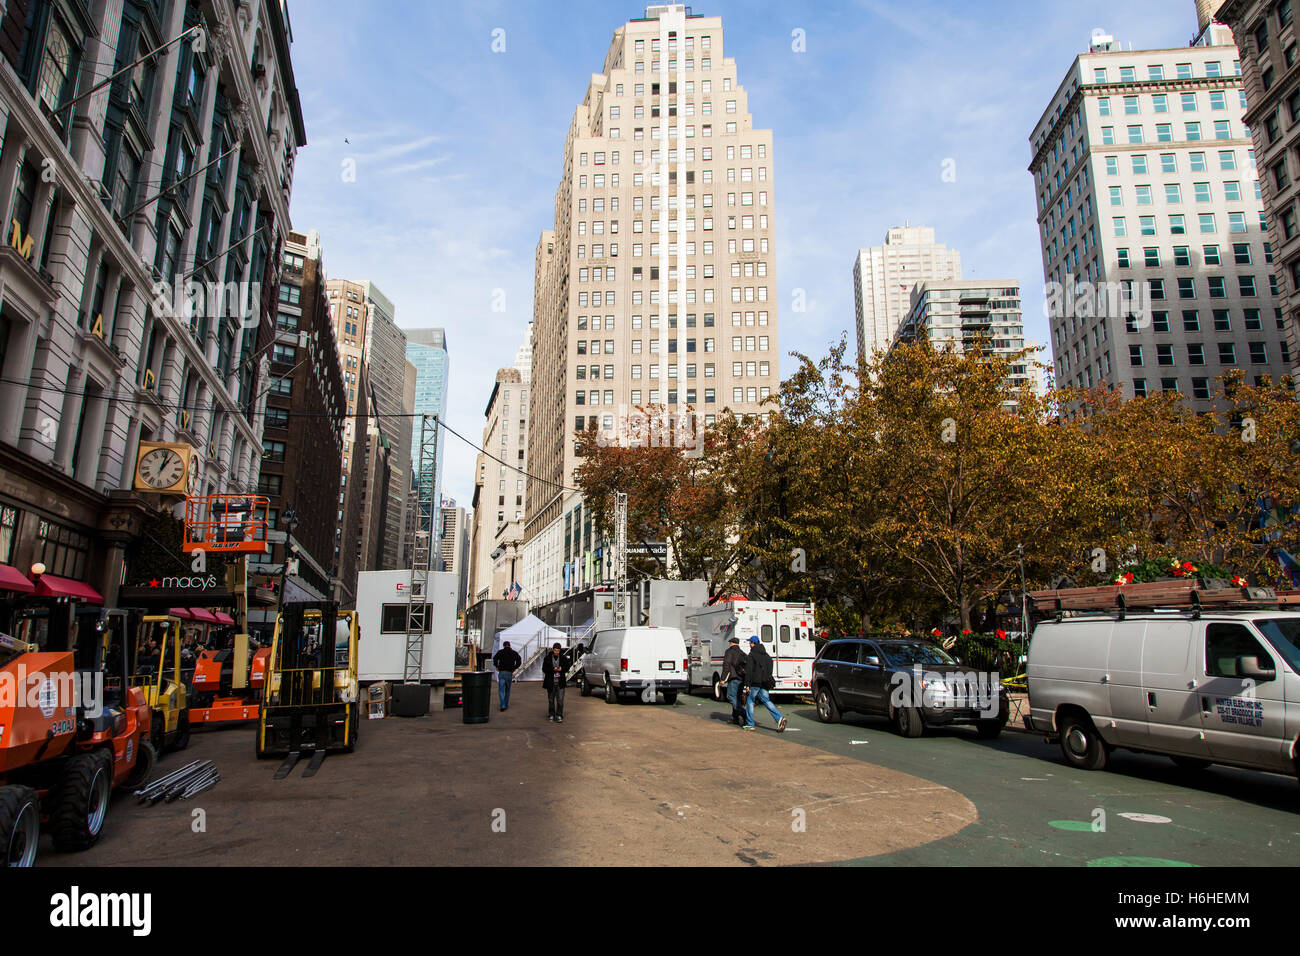 New-York, USA - NOV 20: Preparations at the entrance of Macy's for the annual Thanksgiving parade, on November 20, 2012 in New-Y Stock Photo